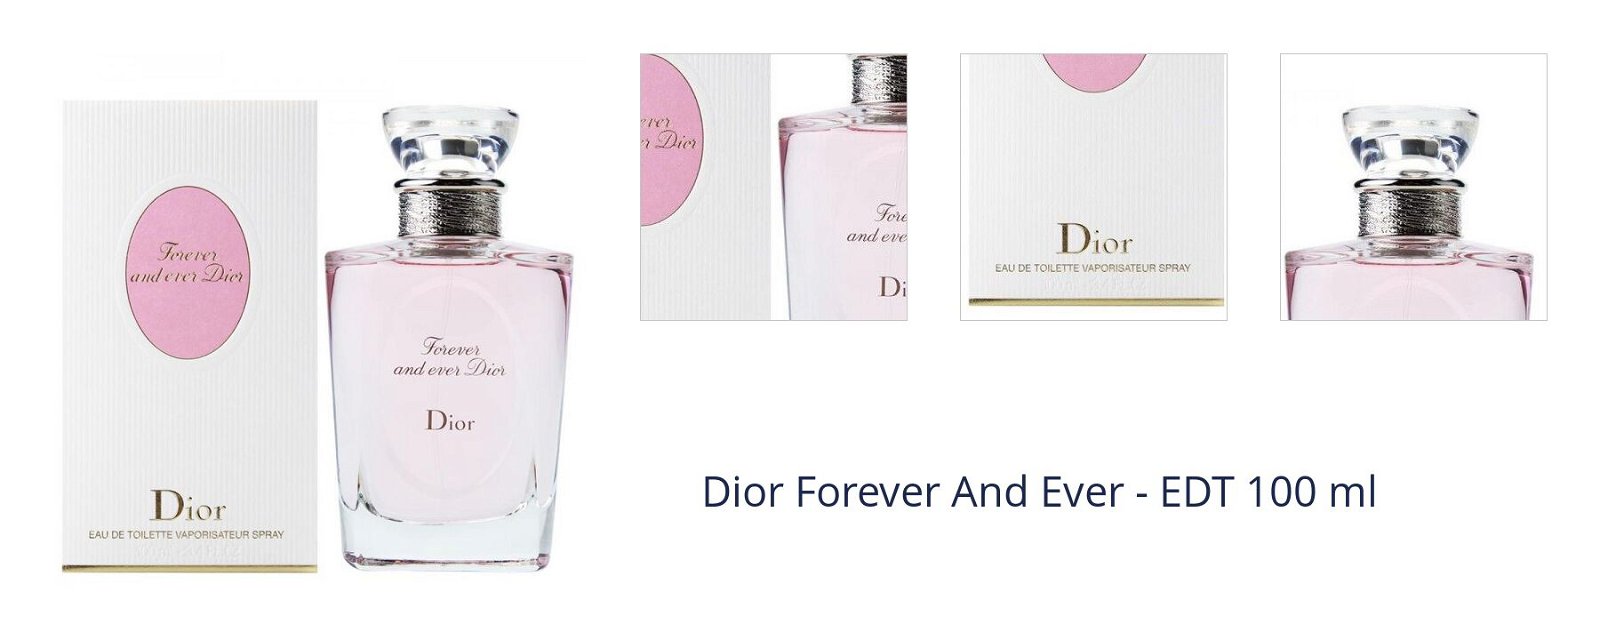 Dior Forever And Ever - EDT 100 ml 1